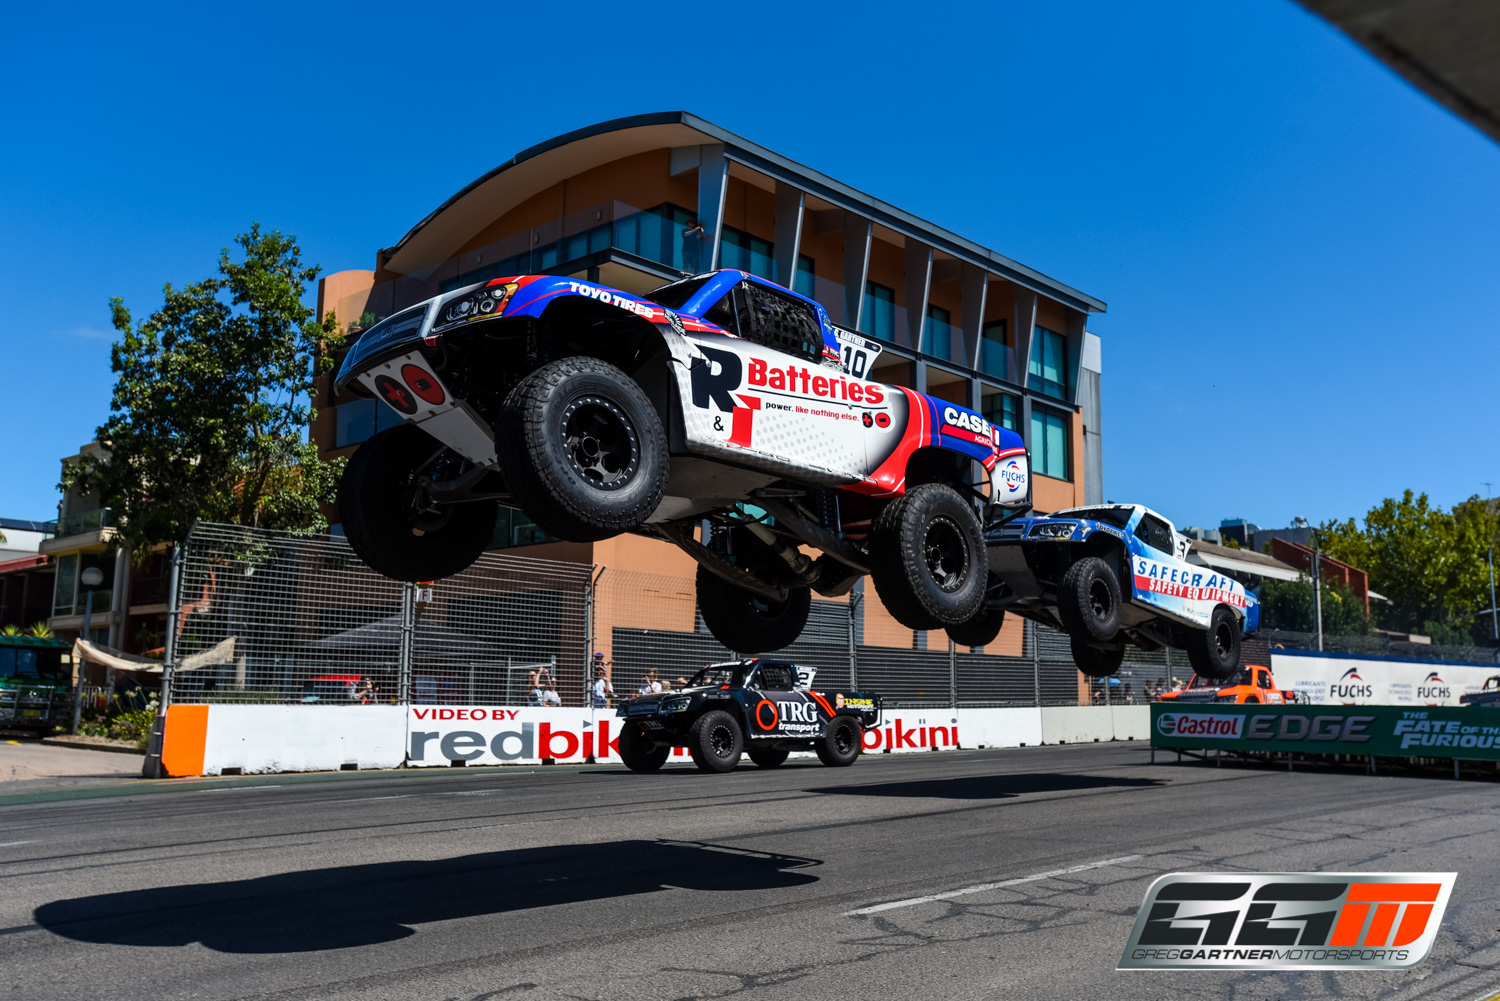 Gartner launching out of turn 7 at the Clipsal 500 in the R&J Batteries Stadium Super Truck